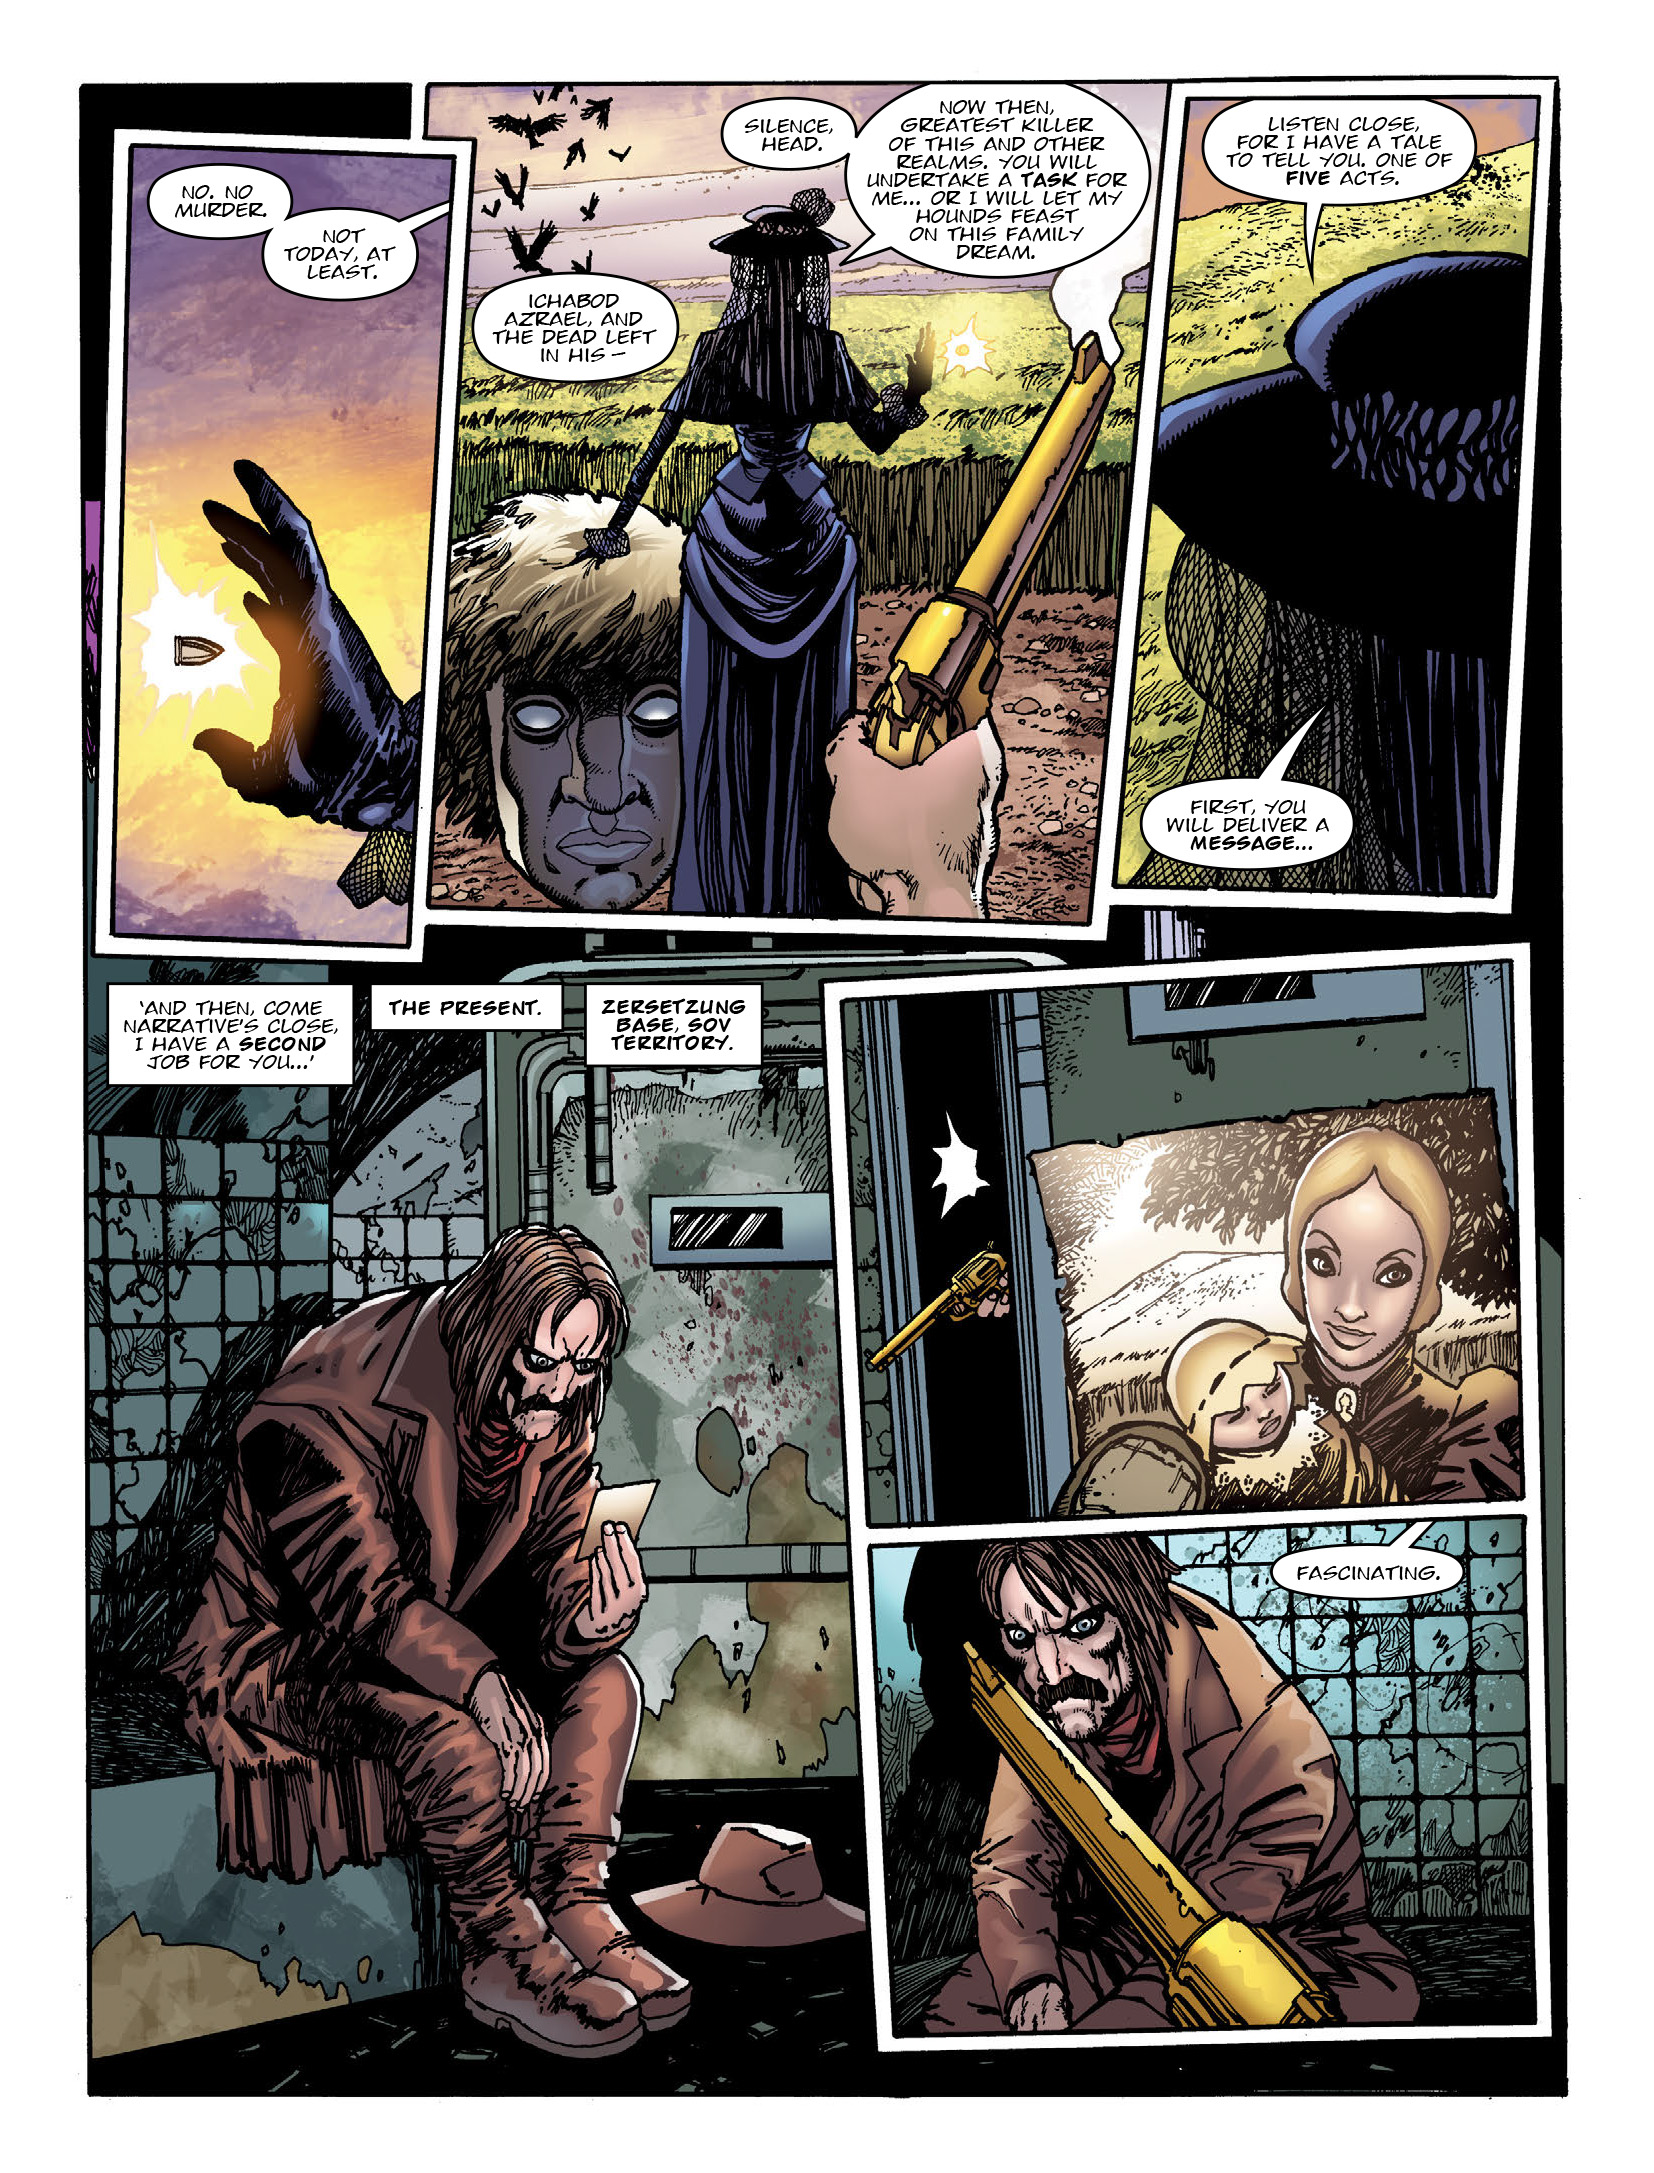 2000 AD: Chapter 2195 - Page 4